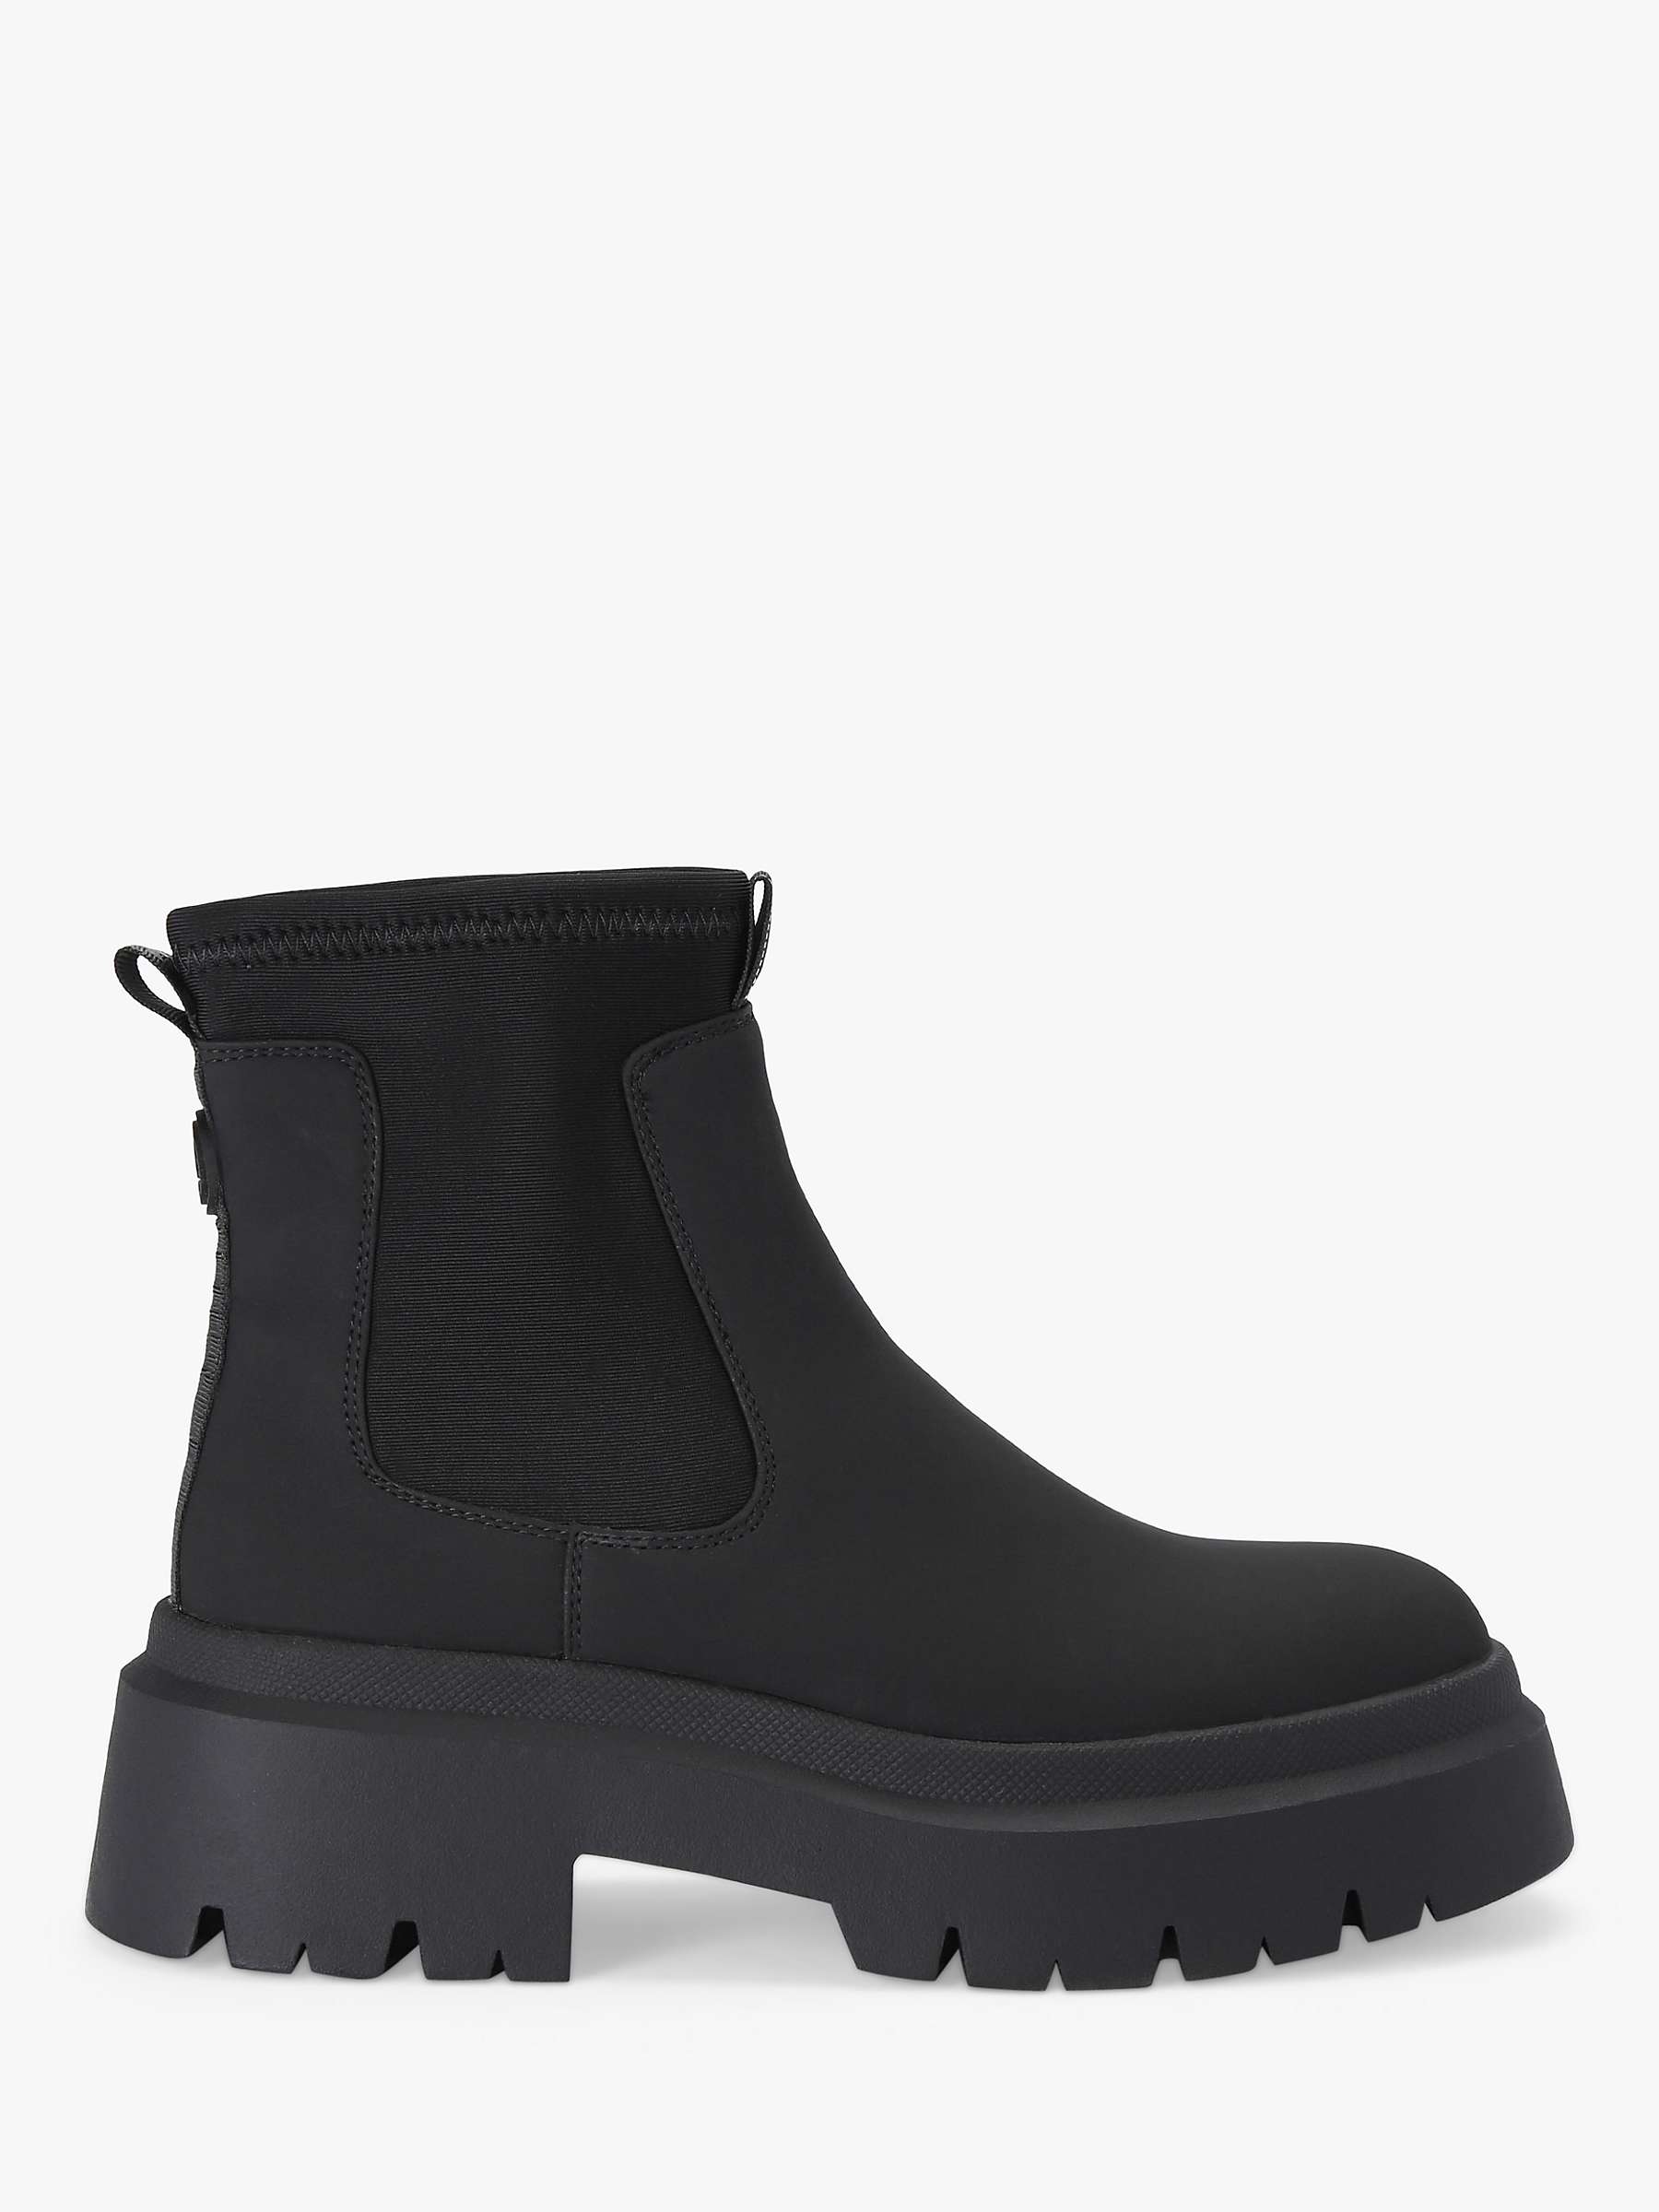 Buy KG Kurt Geiger Thea Chunky Ankle Boots Online at johnlewis.com